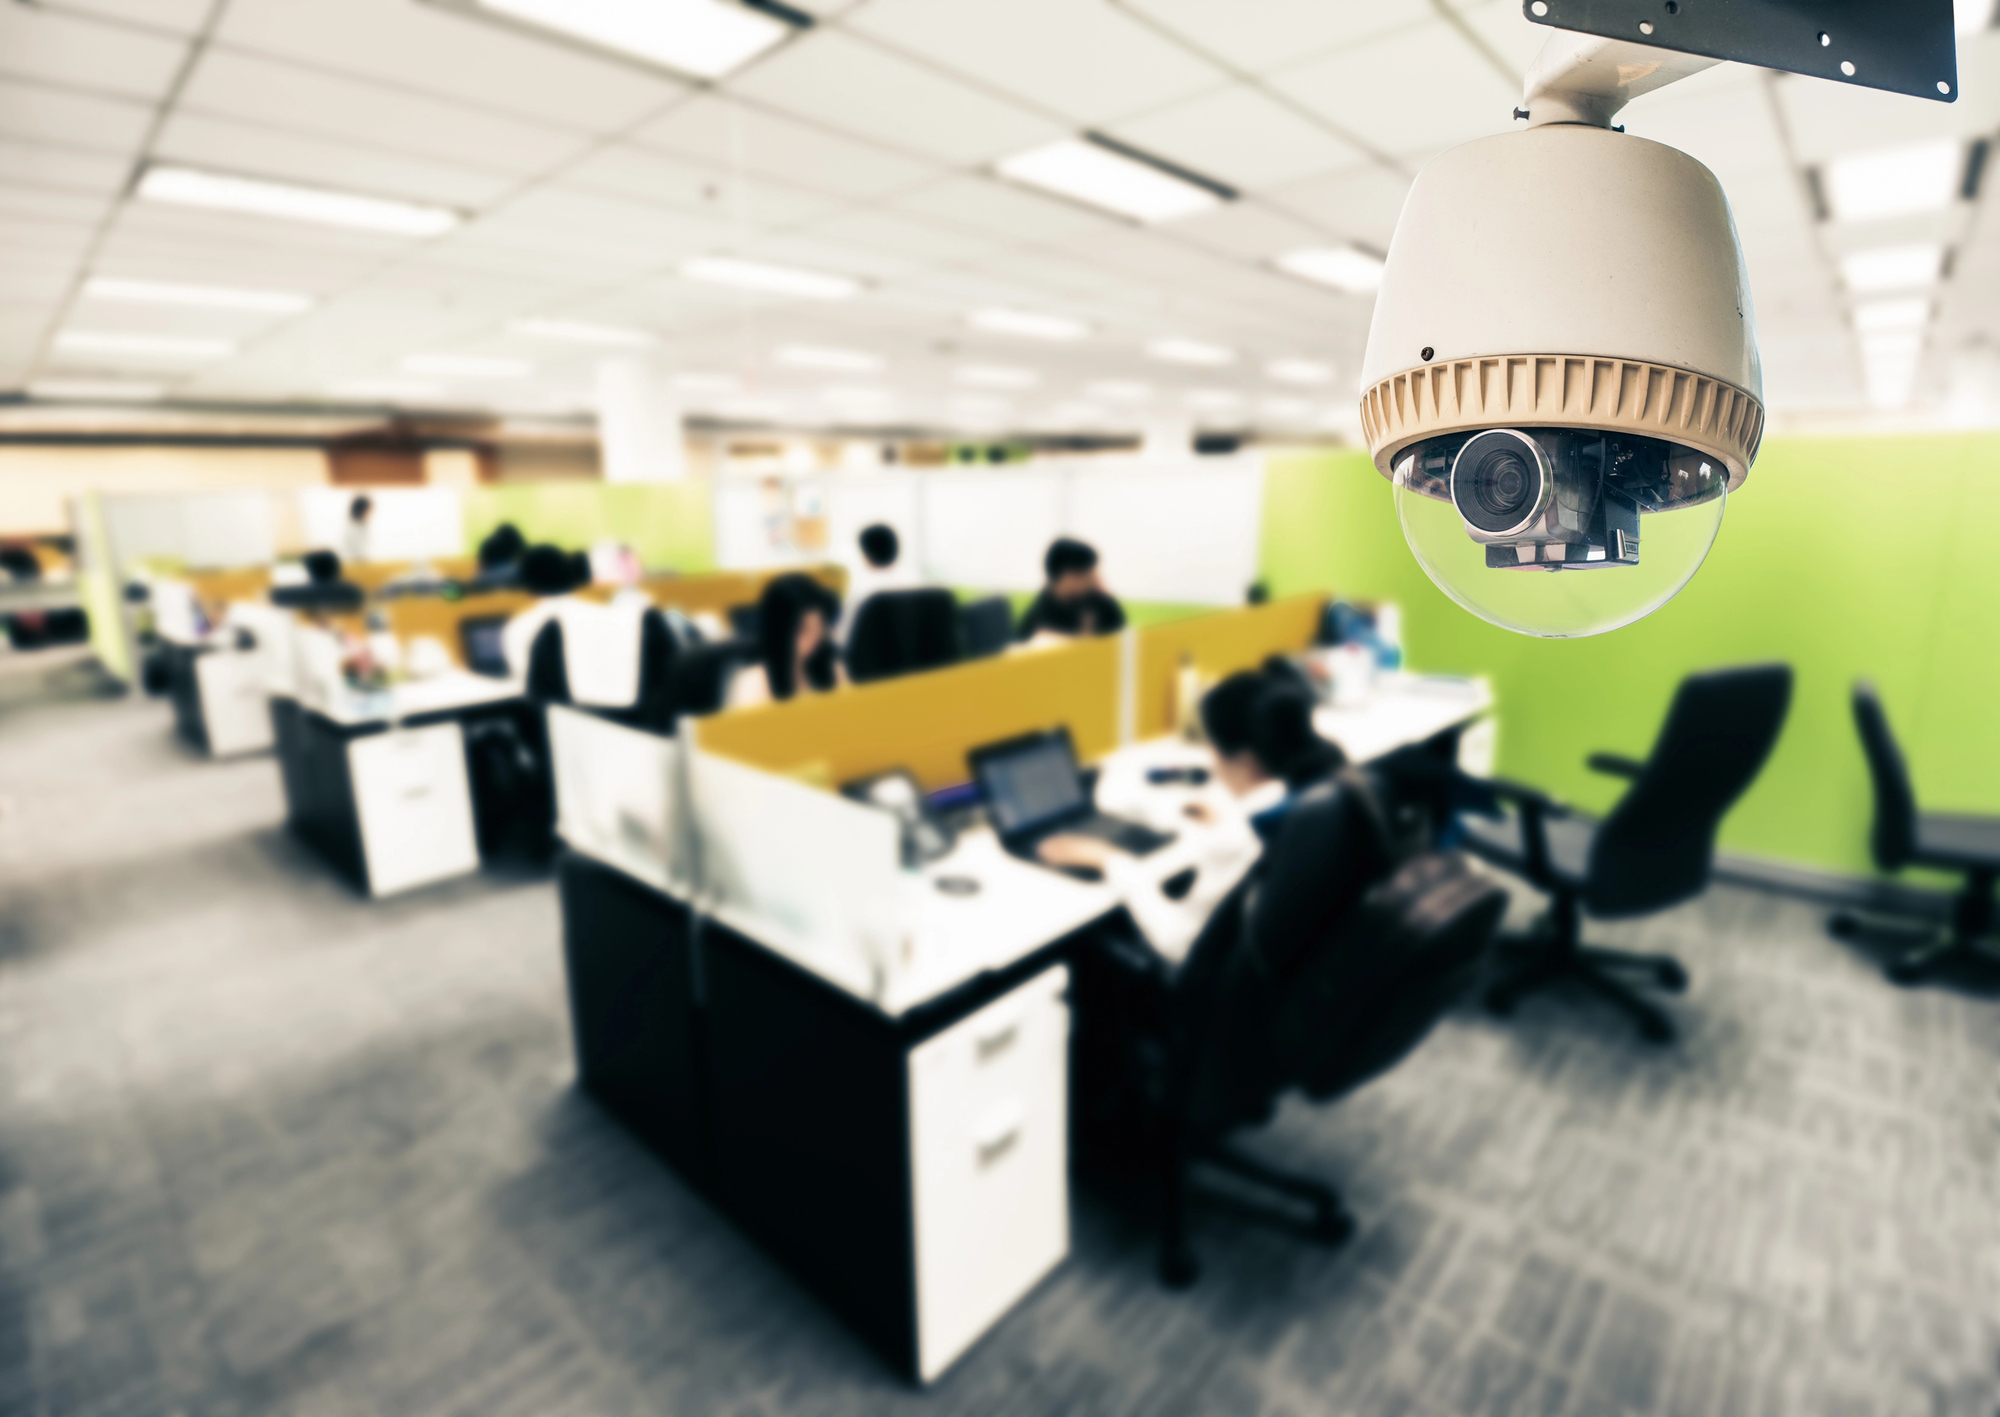 Employee monitoring: Legal and ethical considerations to know